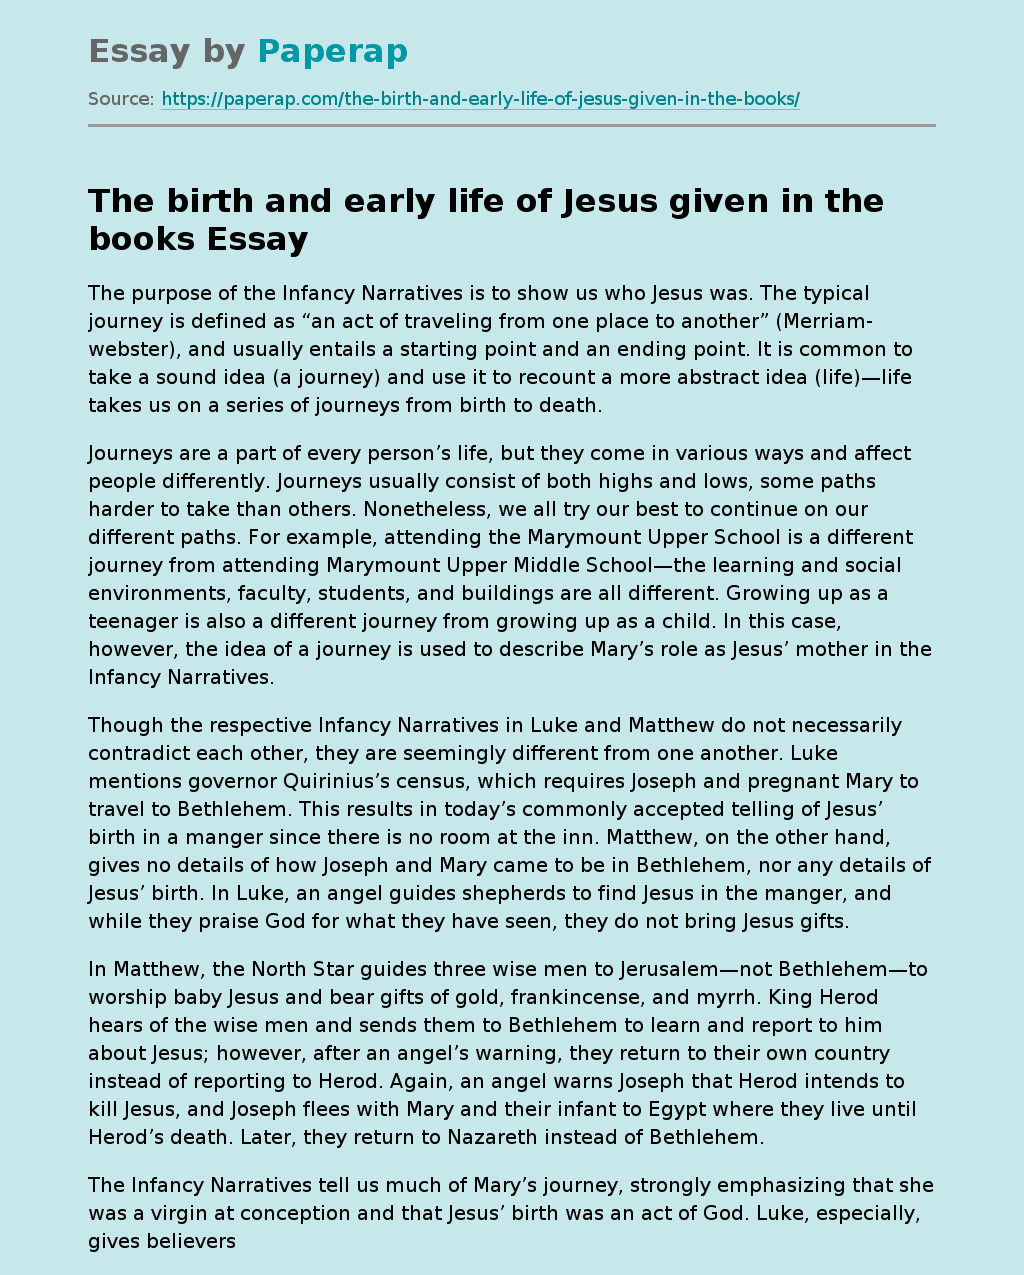 The birth and early life of Jesus given in the books